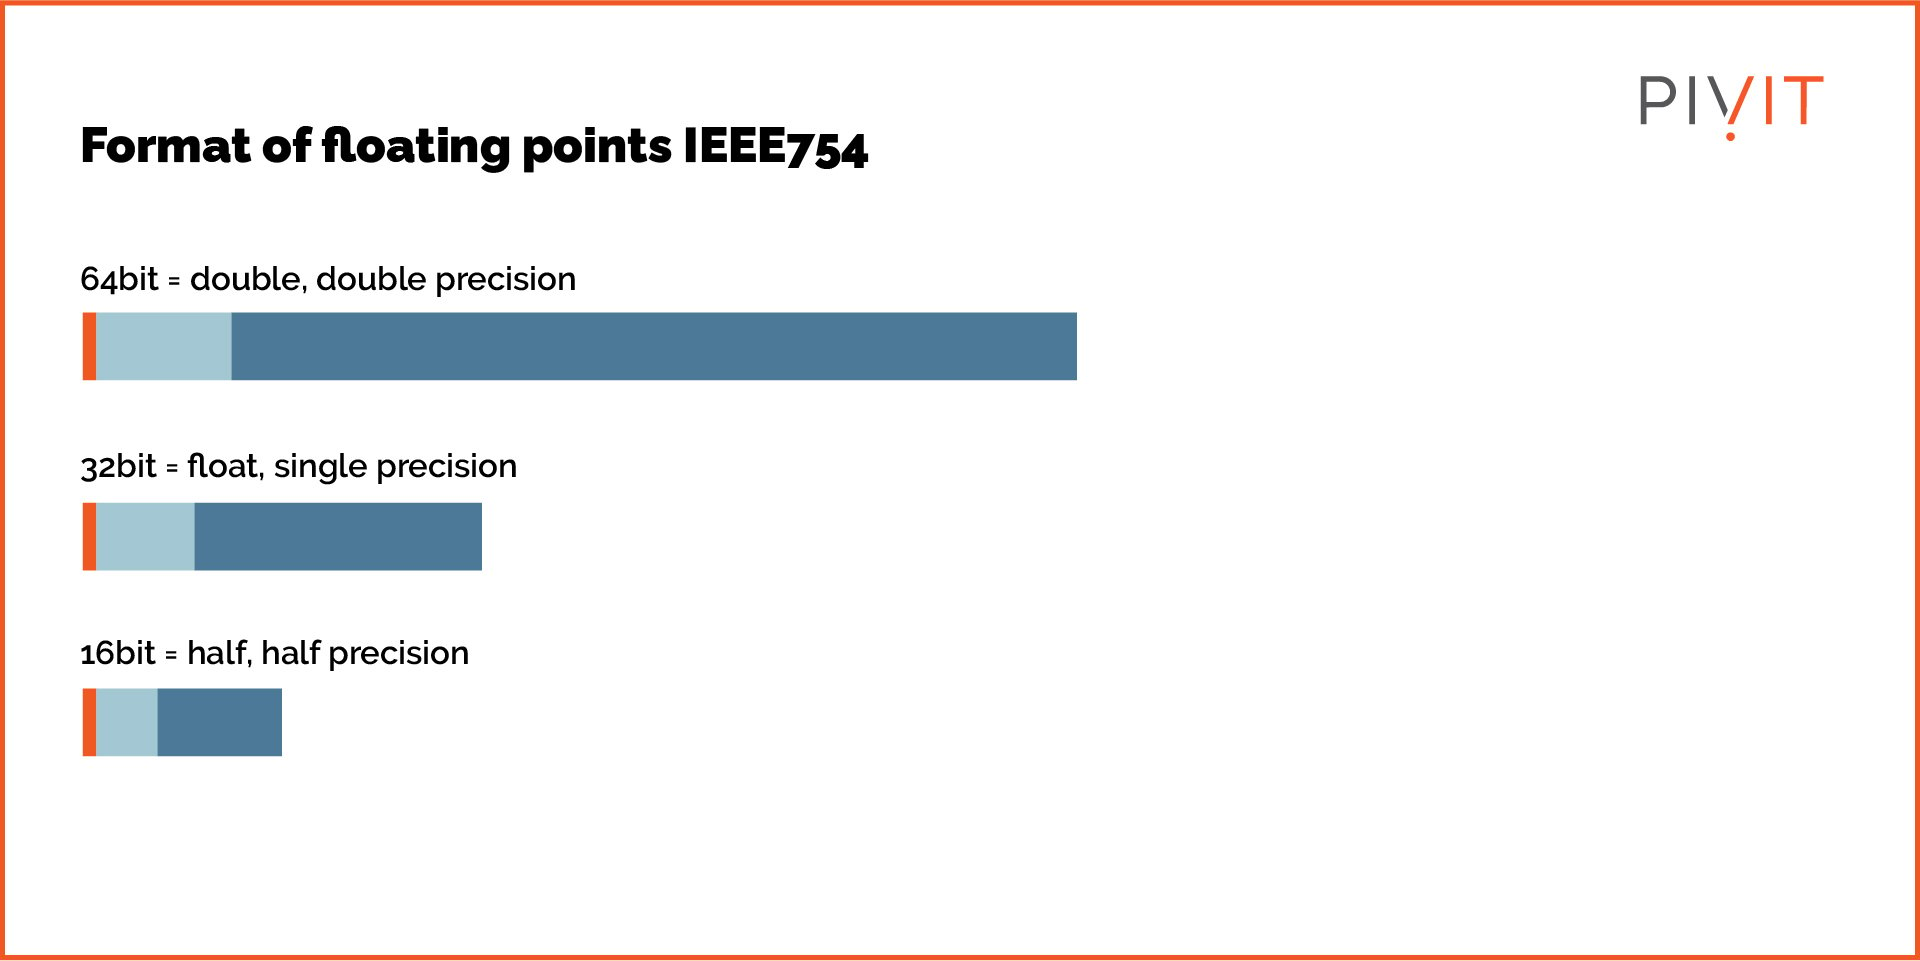 Format of floating points IEEE754